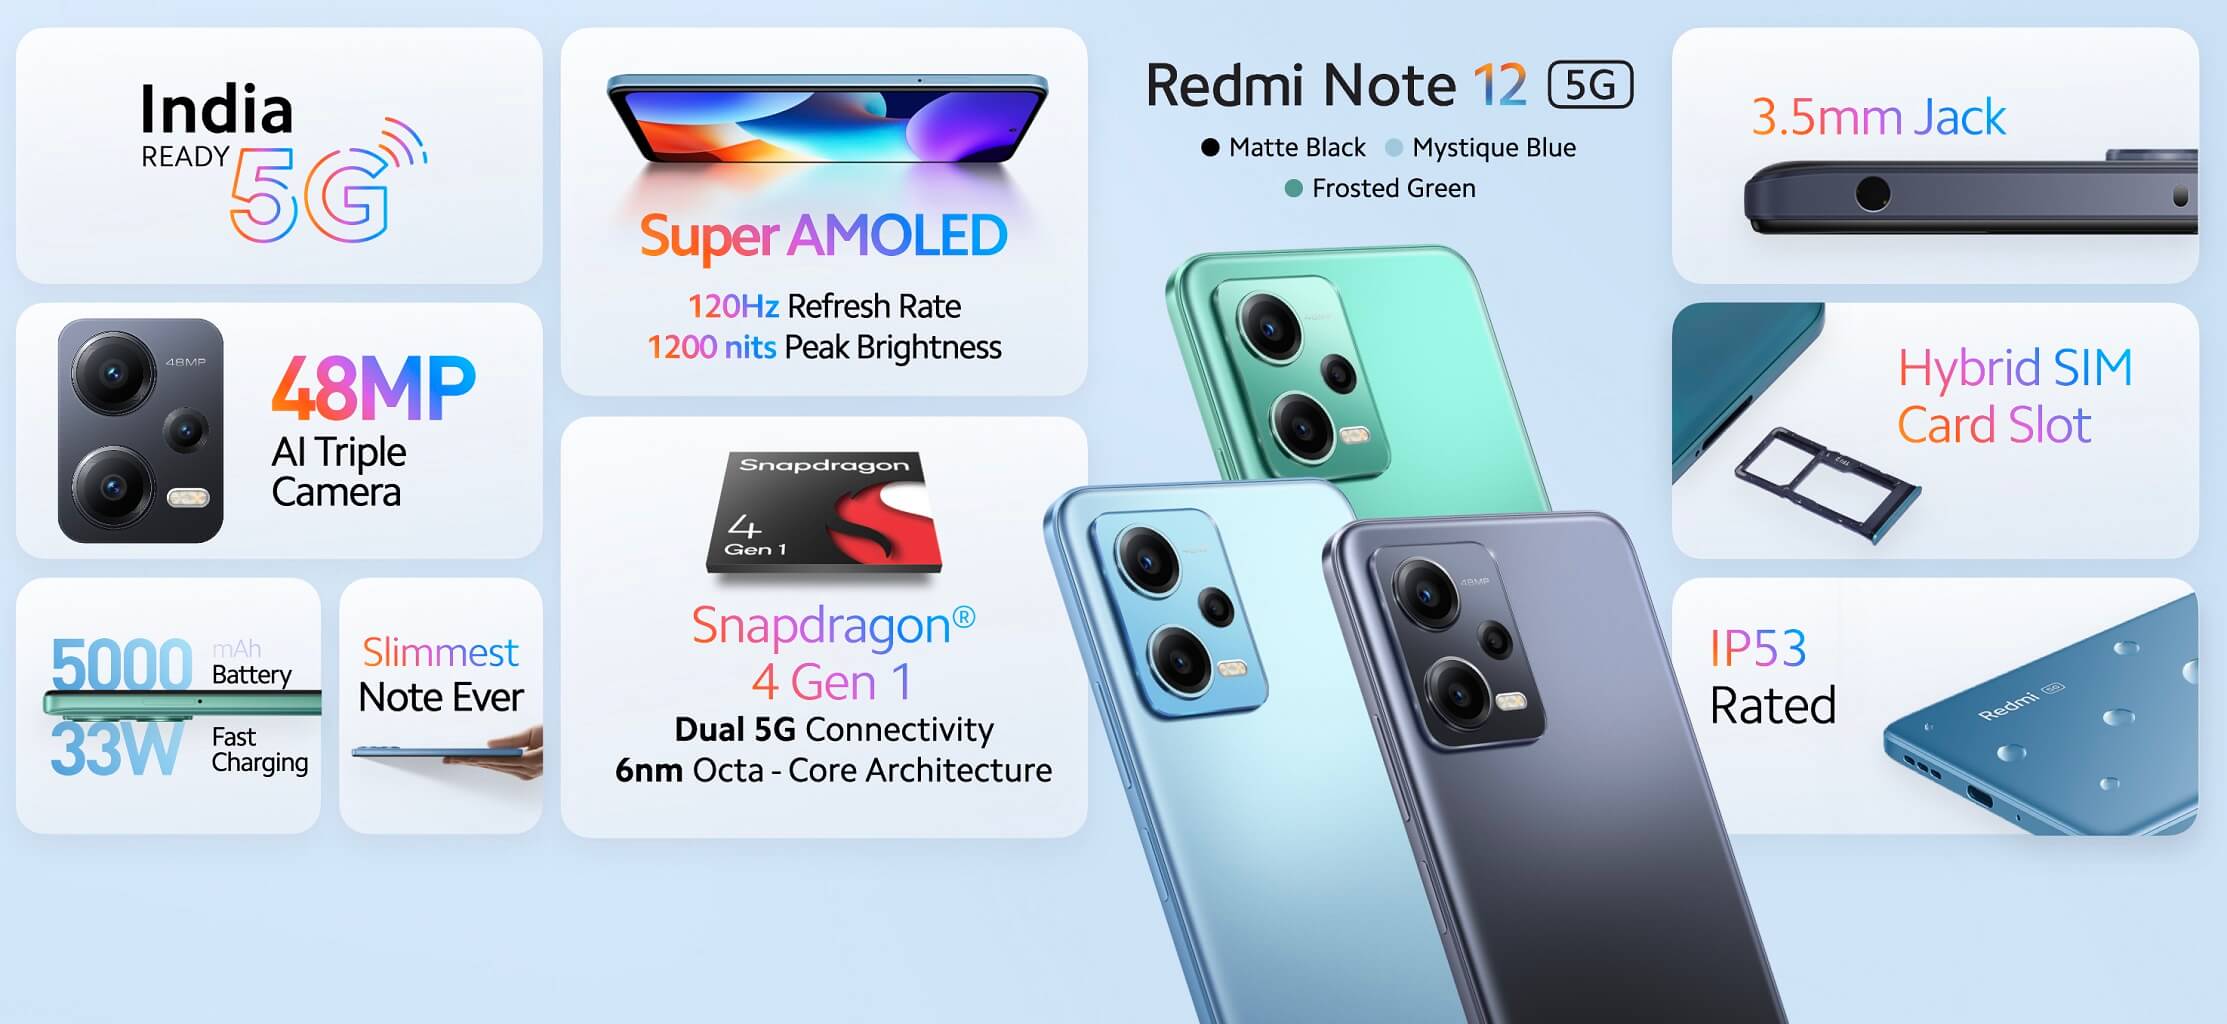 Redmi Note 12 5G features.